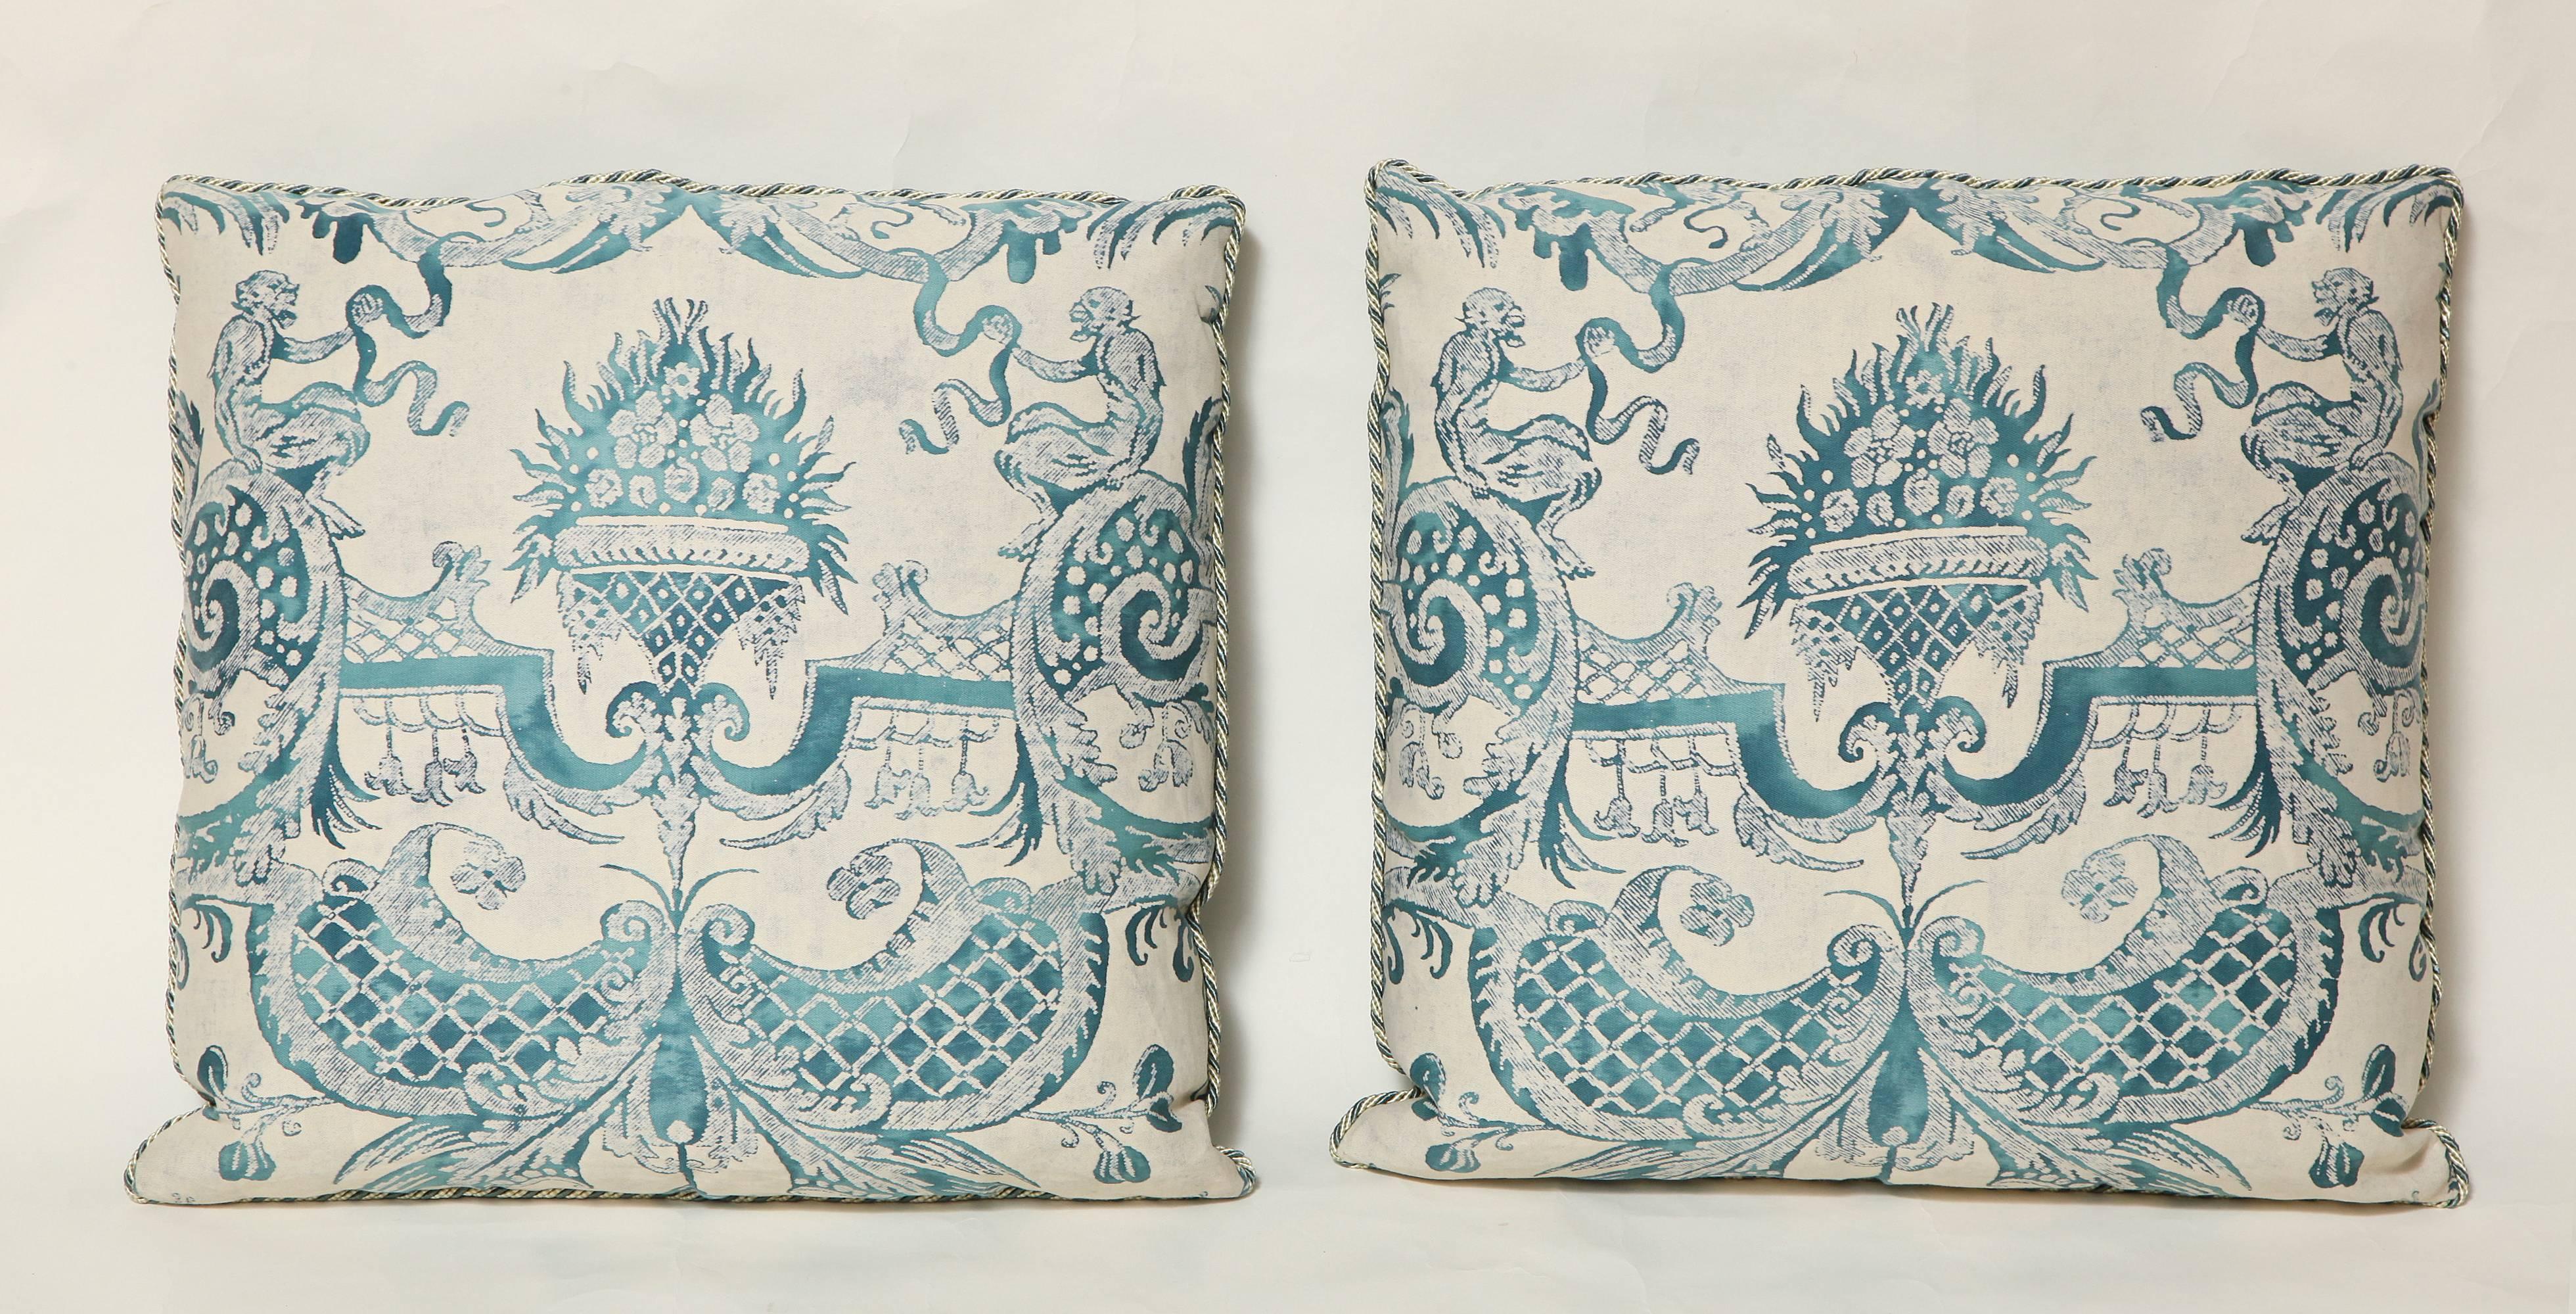 A pair of Fortuny fabric peacock blue and ivory Mazzarino pattern cushions with white and blue braided edging and grey/silver silk taffeta backs.